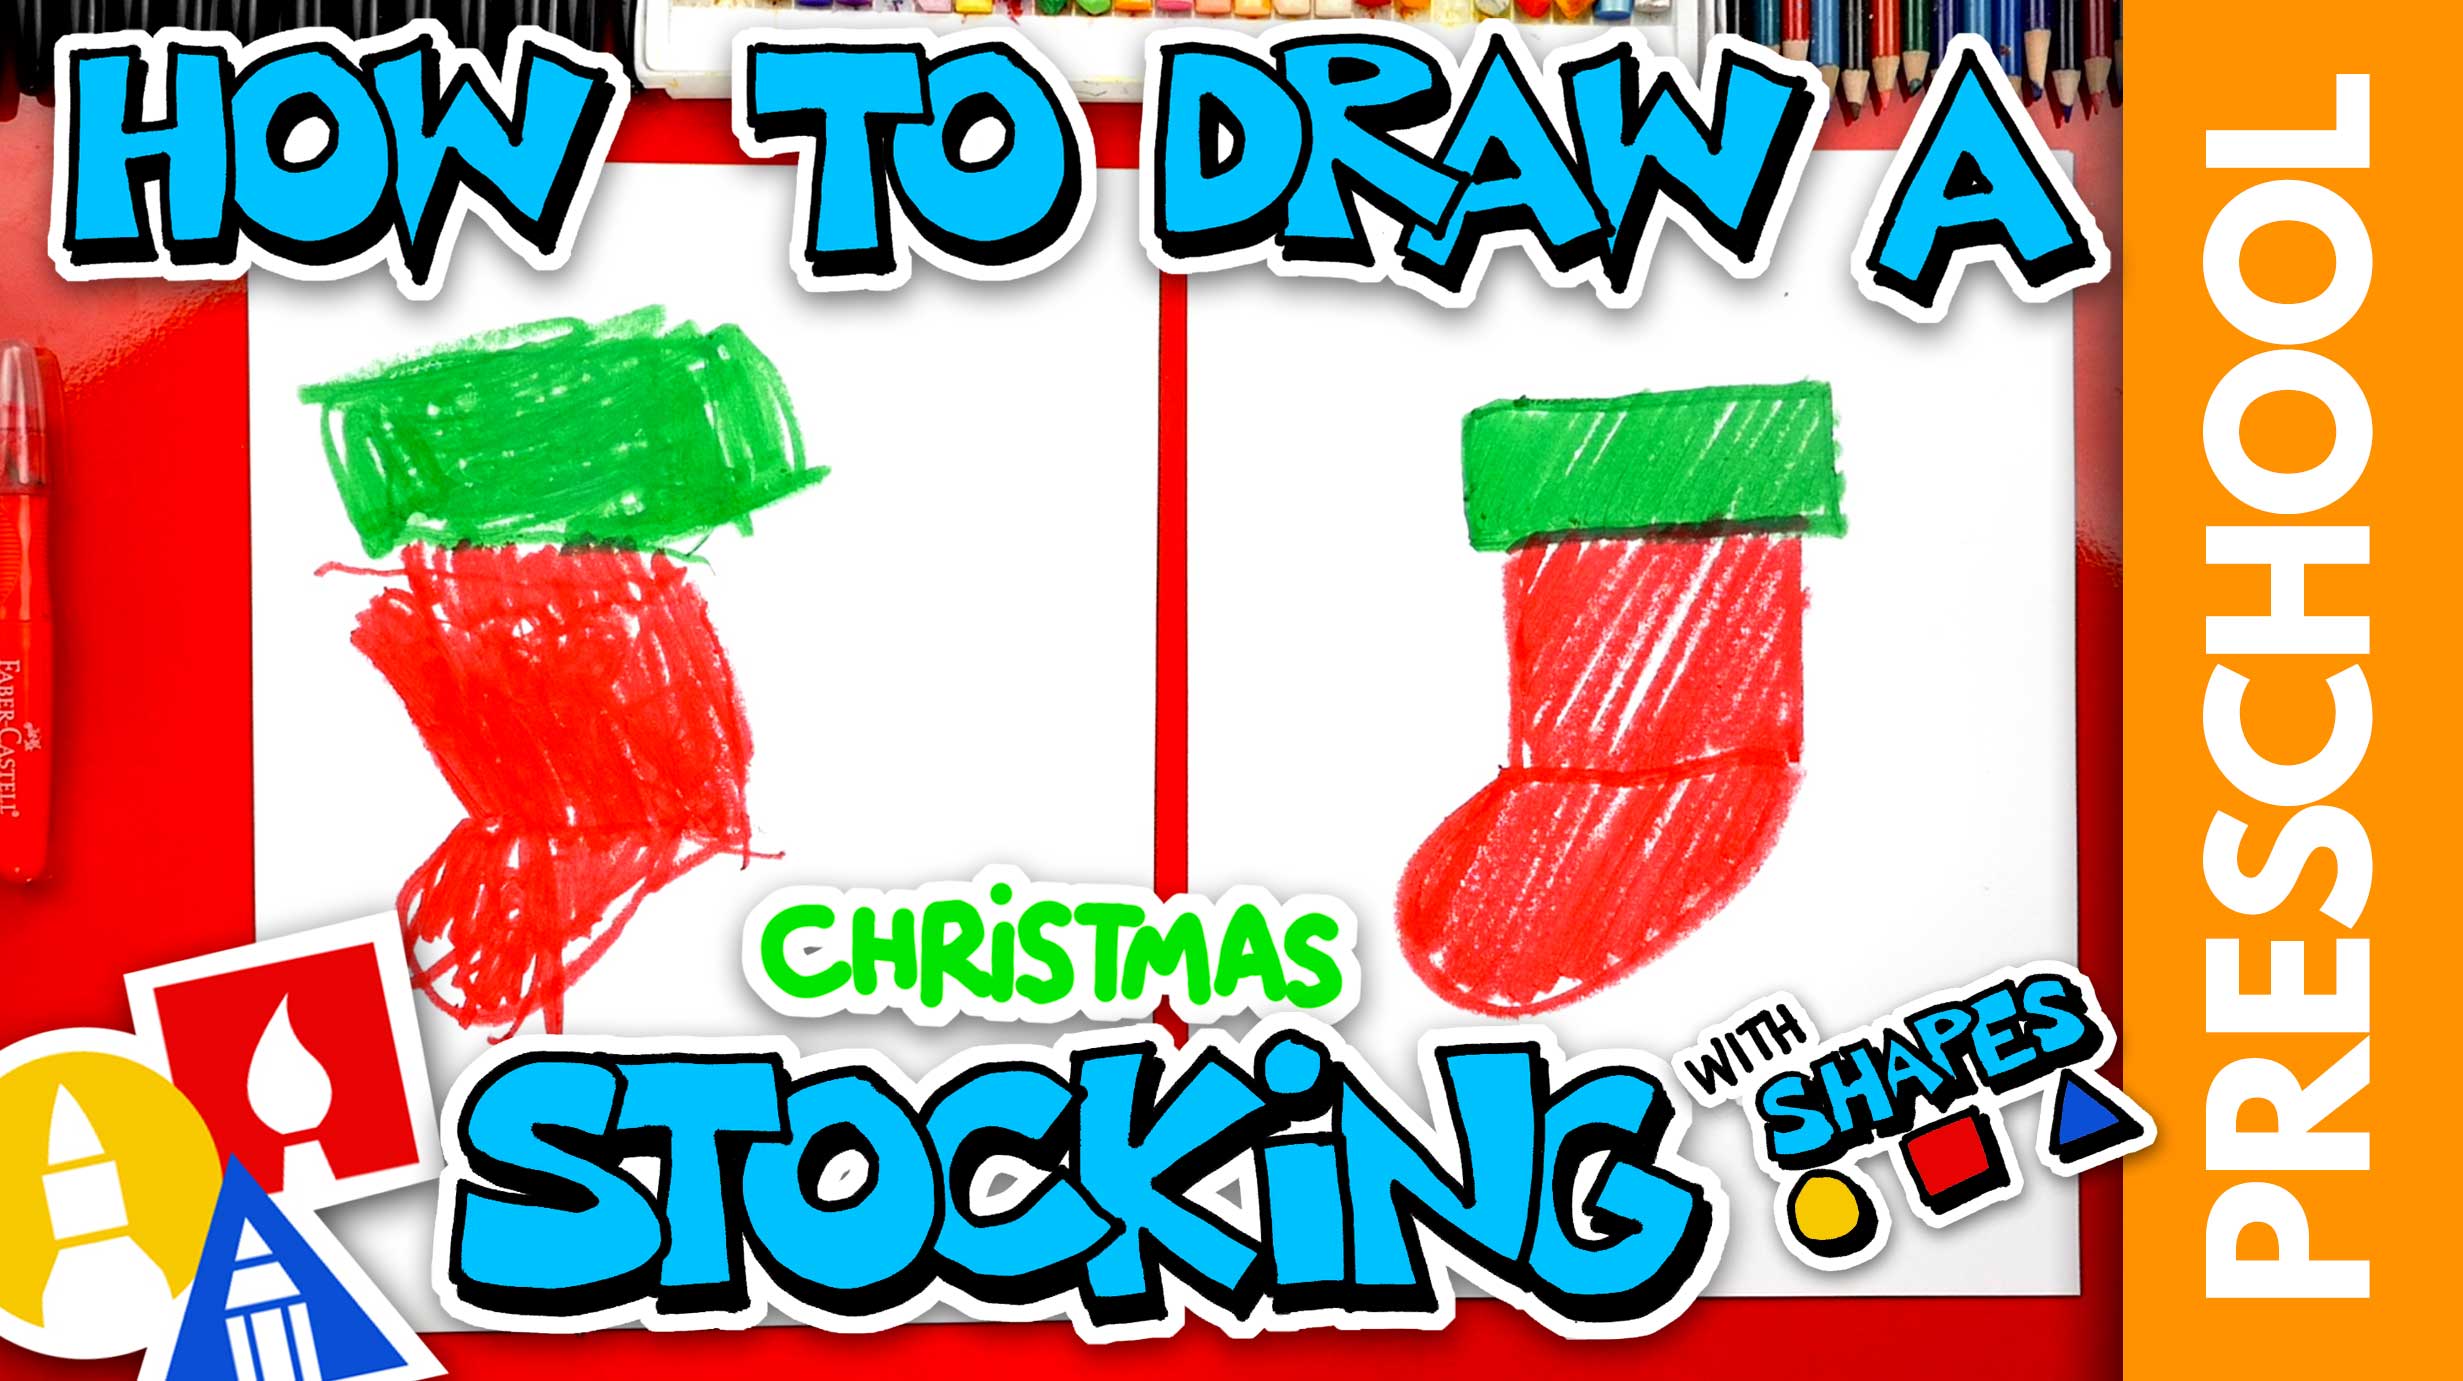 Drawing A Christmas Stocking With Shapes - Preschool - Art For Kids Hub